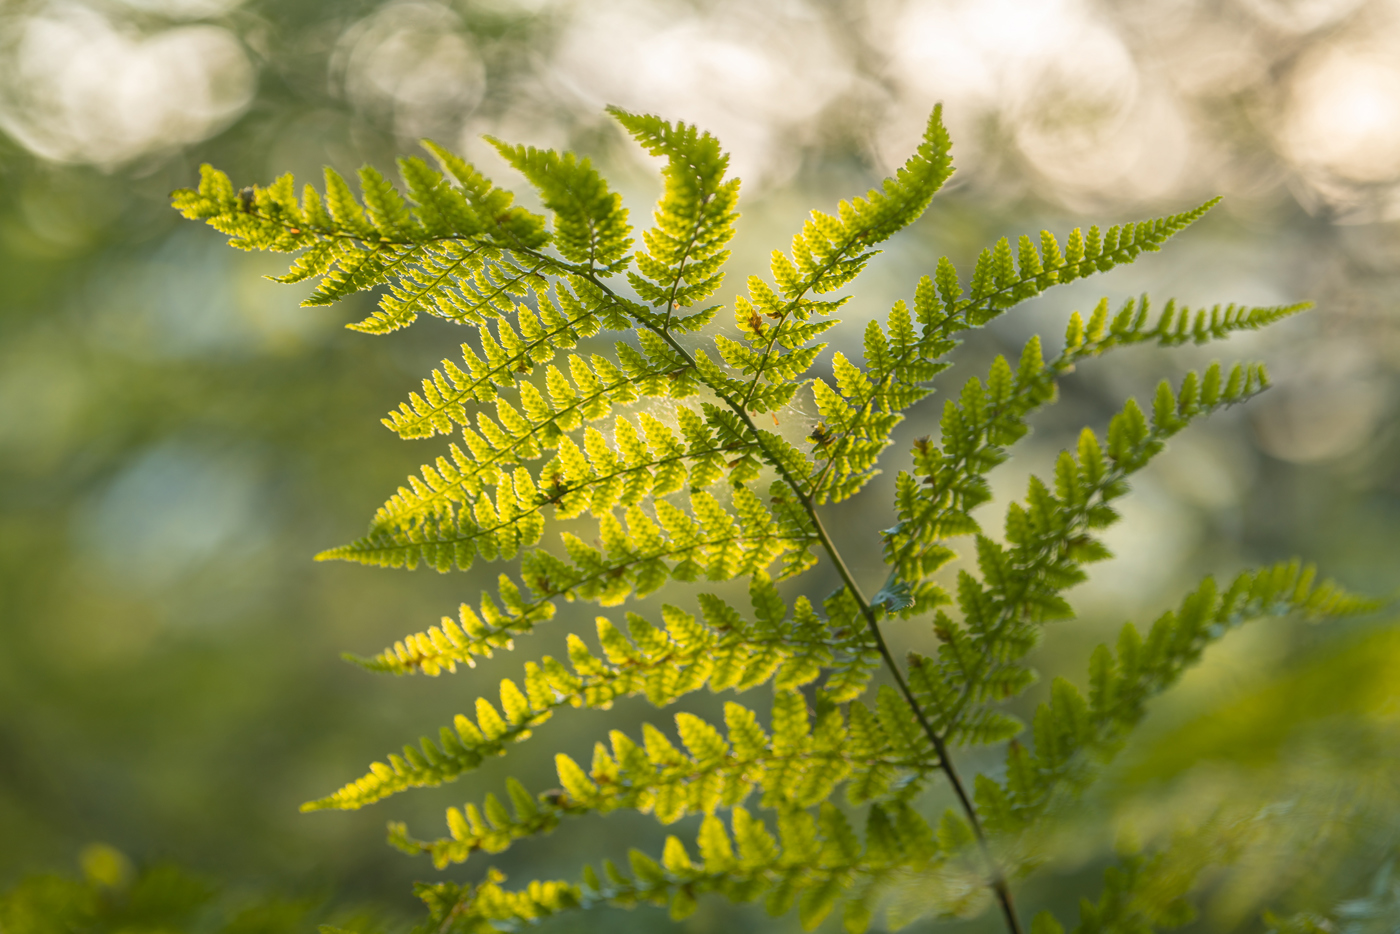 This is an image of a delicate fern basking in soft golden sunlight amidst North Yorkshire's verdant flora. The intricate, lace-like leaves are aglow, creating a serene woodland tapestry highlighted by nature's quiet elegance. a close up of a plant